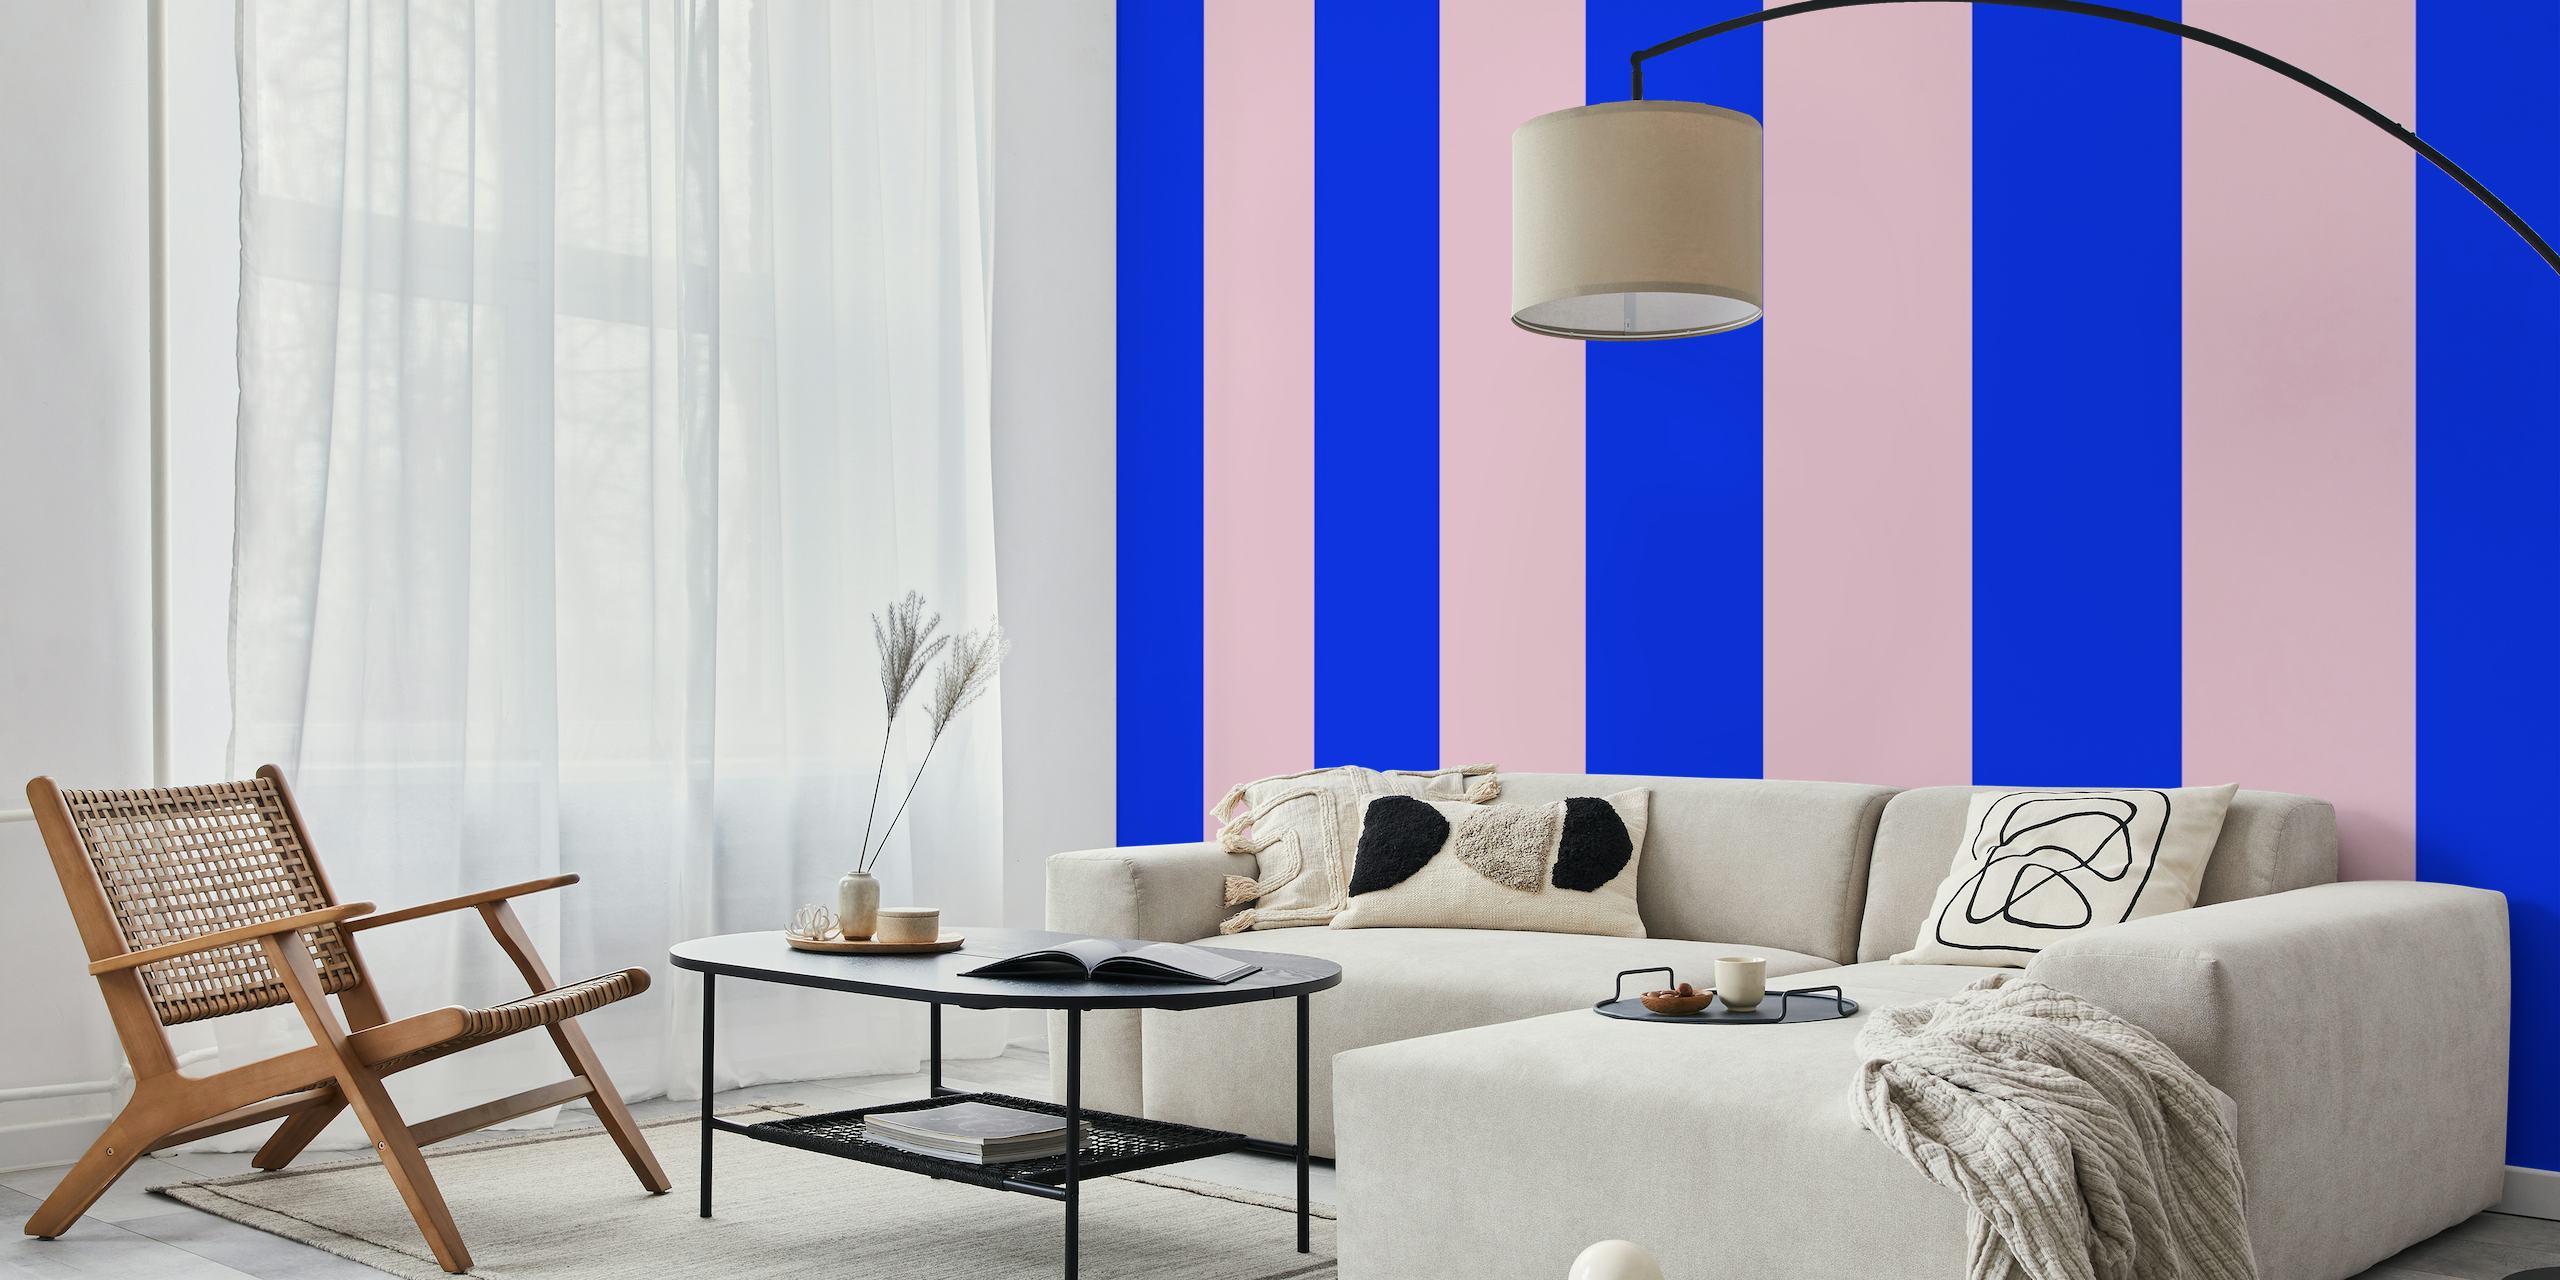 Blue and pink striped wall mural from Happywall named Blau Rosa Streifen